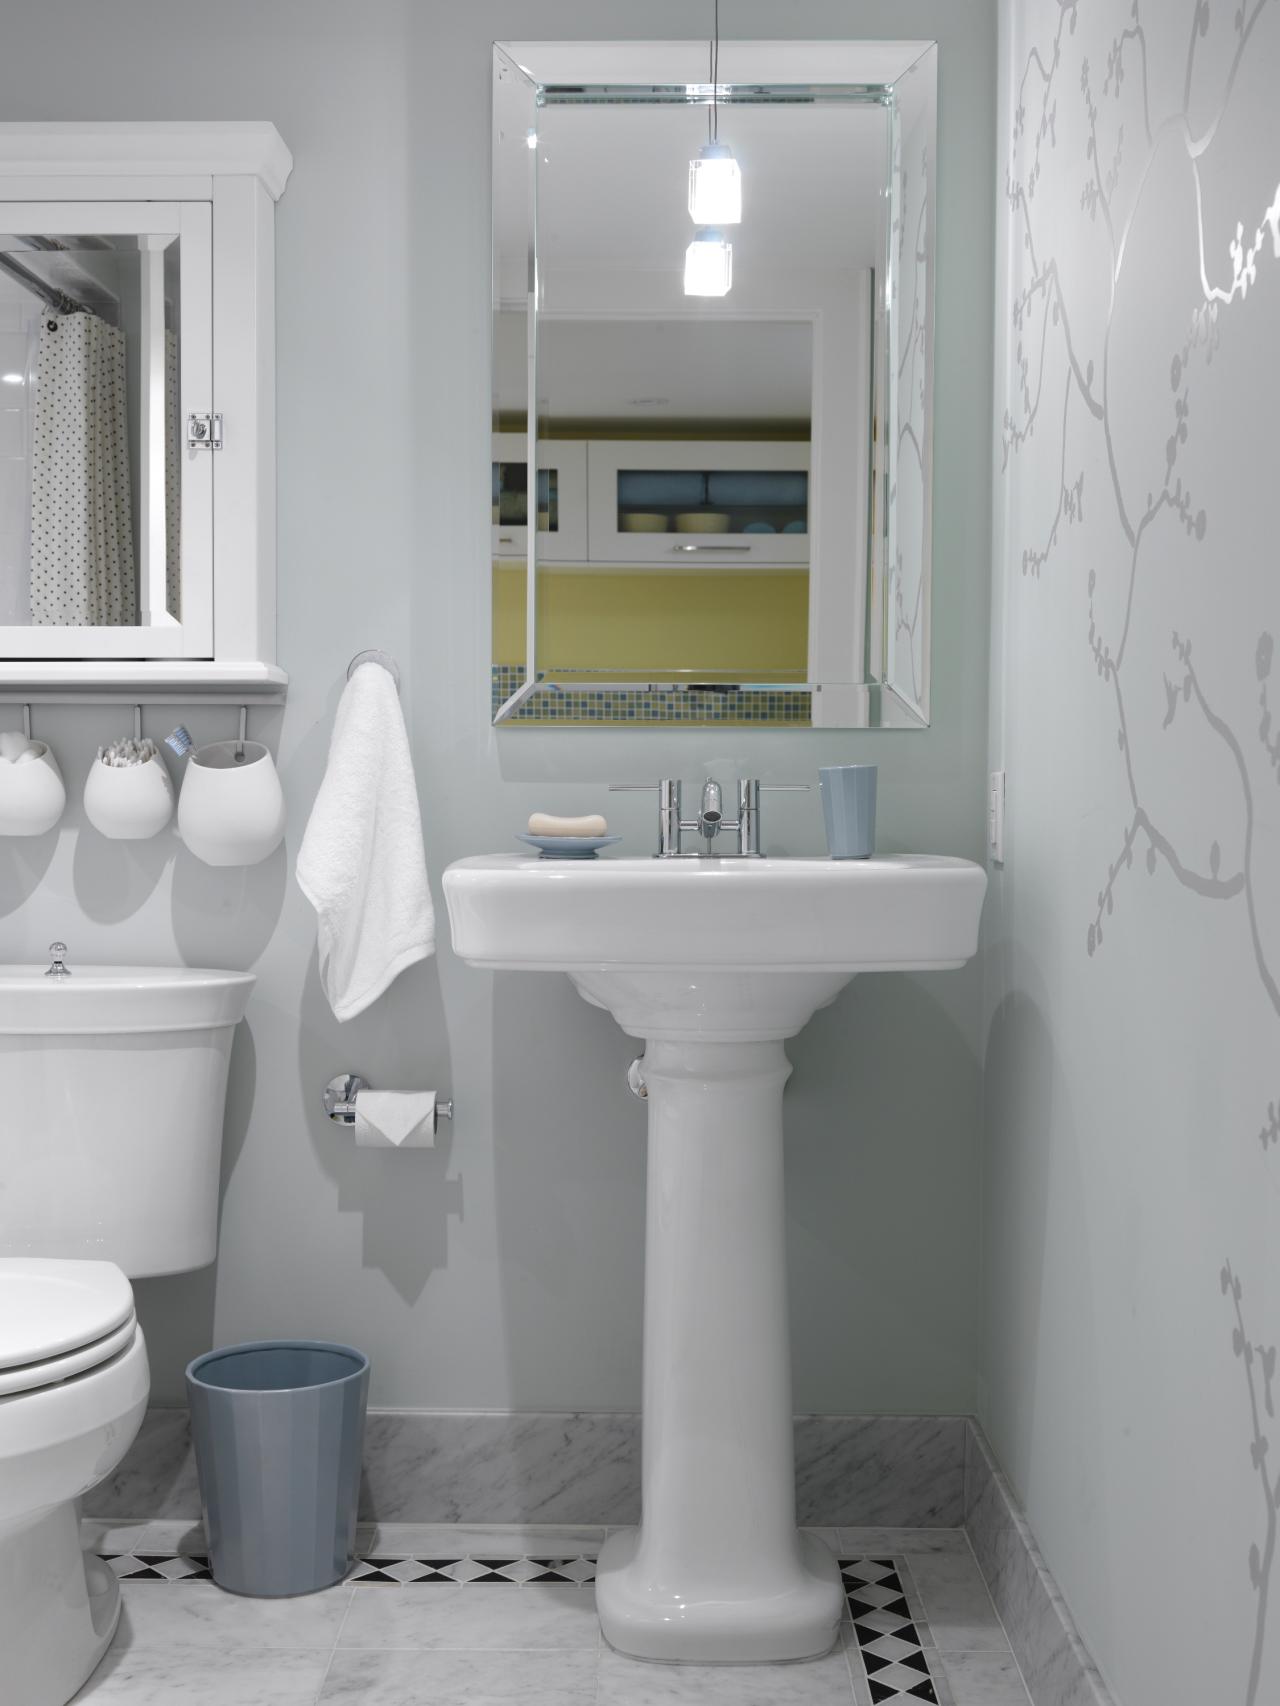 What are some small bathroom remodeling ideas?